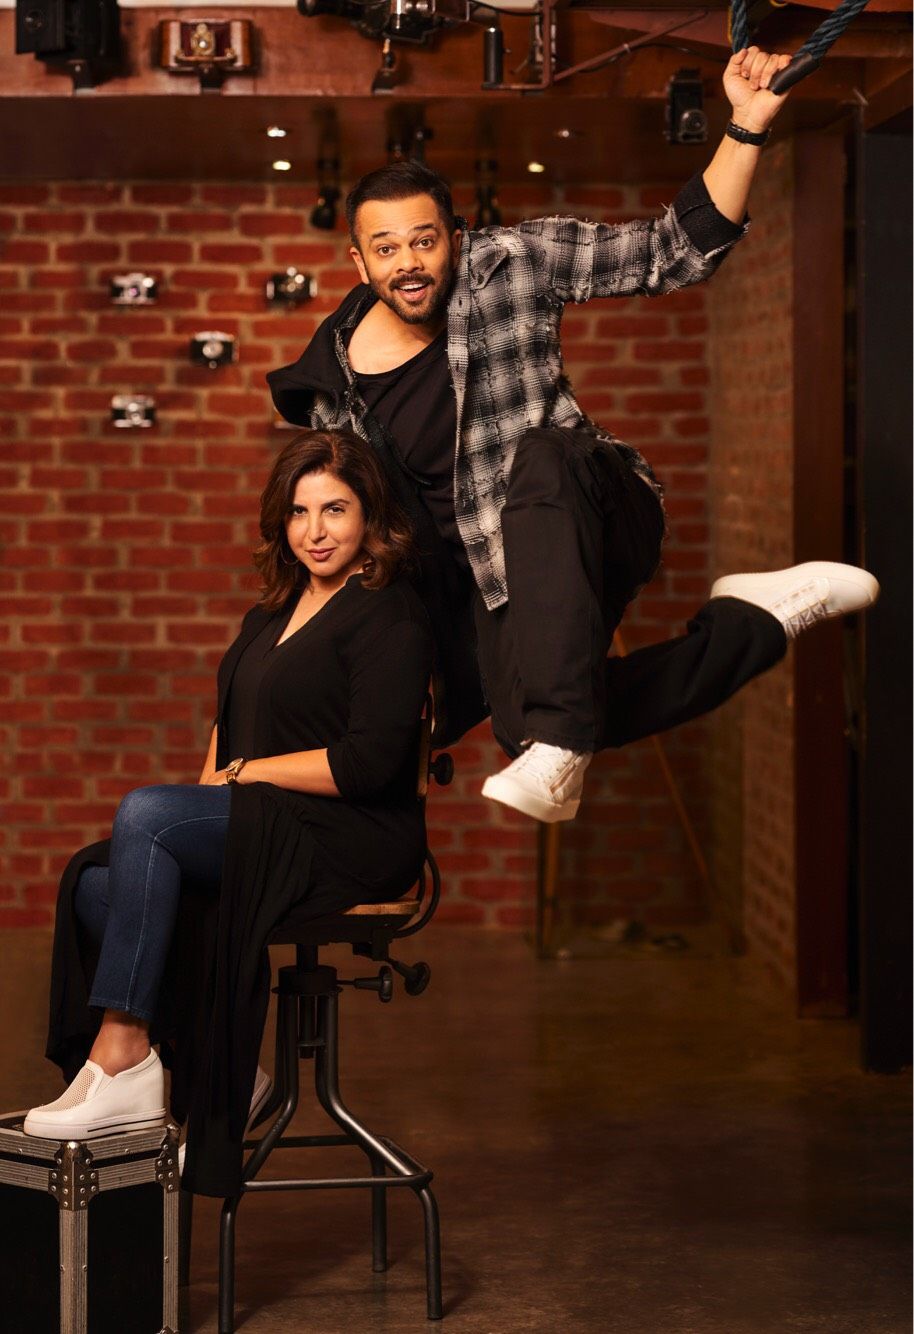 Rohit Shetty Signs Farah Khan To Direct The Biggest Action Comedy Flick For His Production House